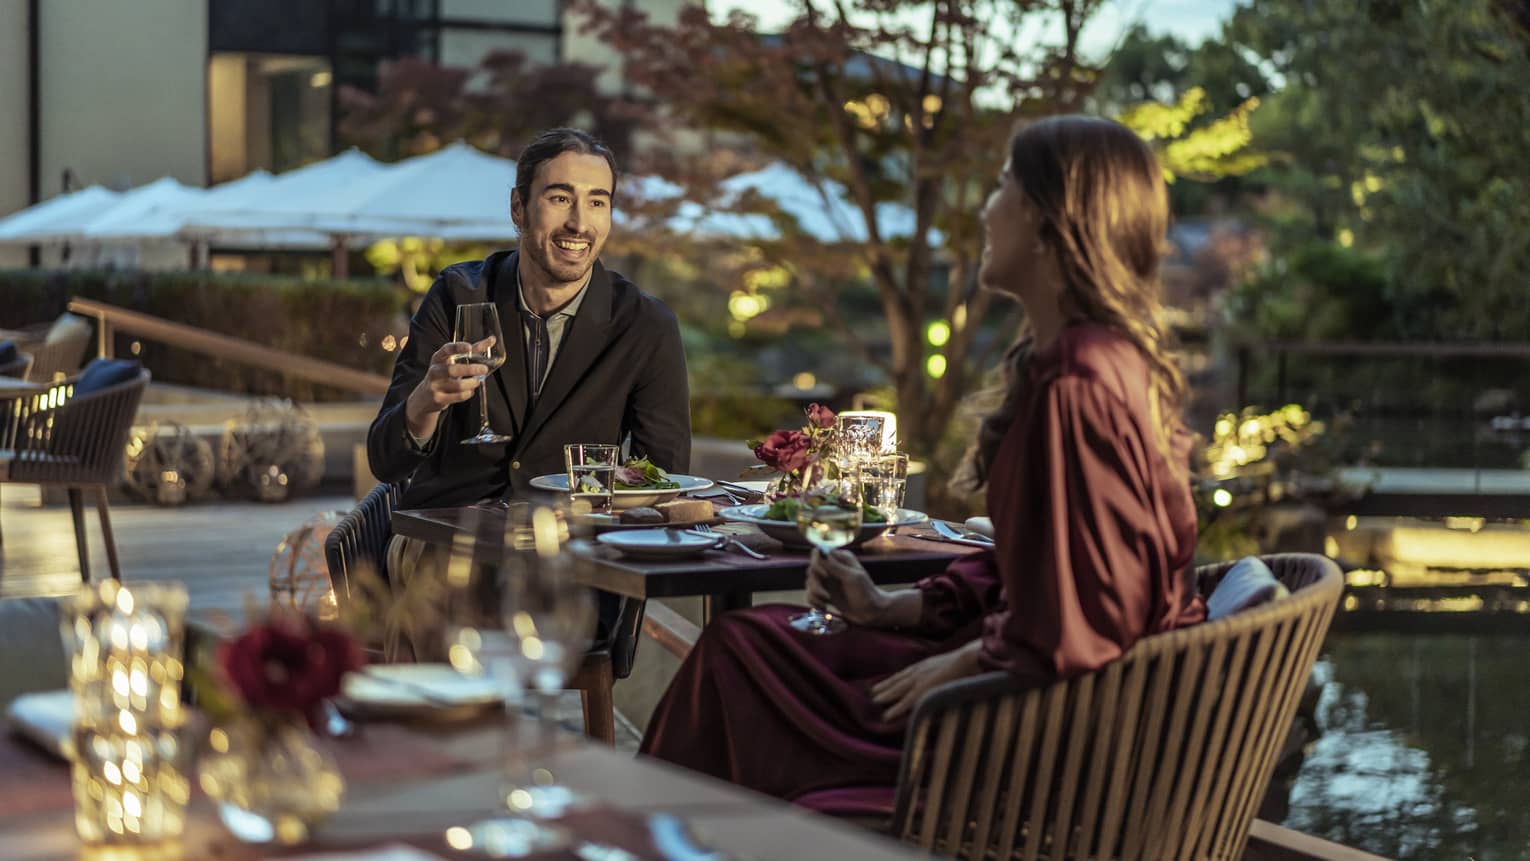 Couple enjoys a romantic meal at dusk on Brasserie?s outdoor terrace with views of Shakusui-en pond garden